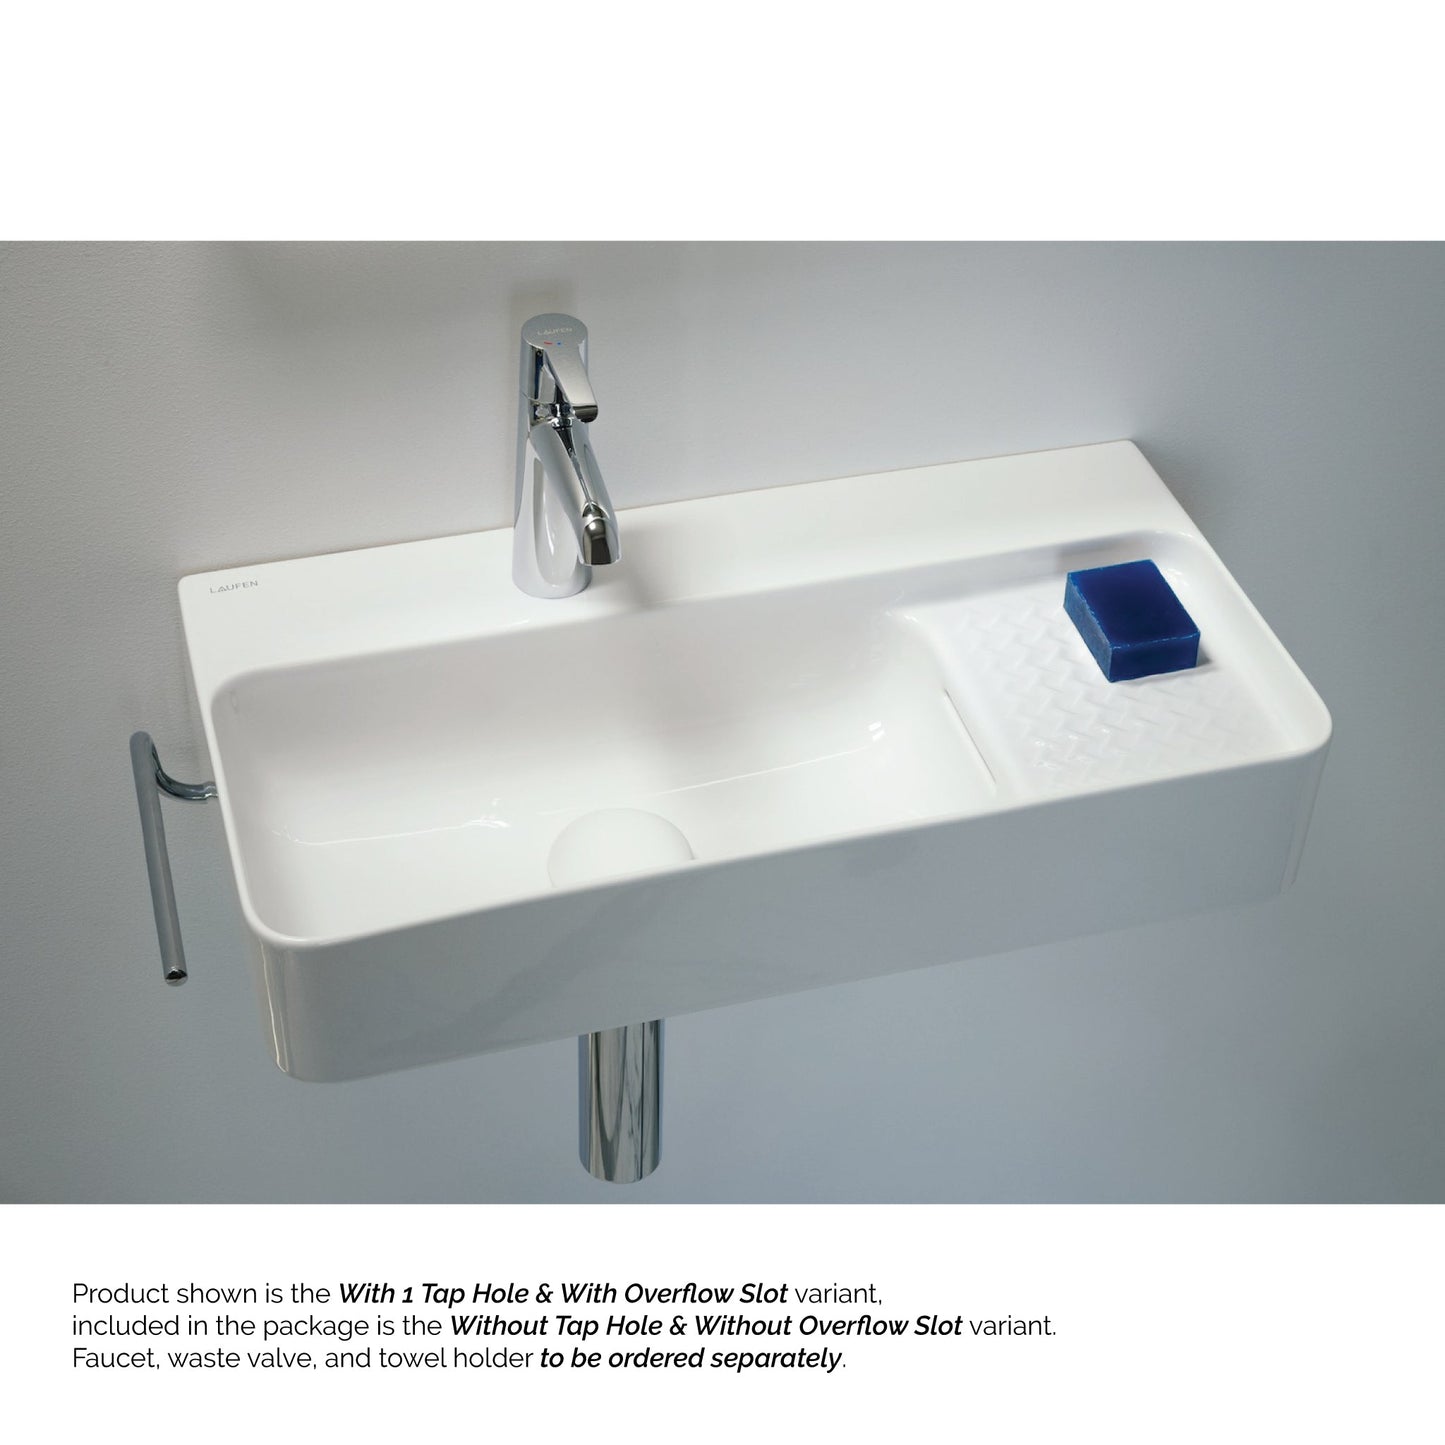 Laufen Val 24" x 12" Rectangular White Wall-Mounted Bathroom Sink Without Facuet Holes and Overflow Slot